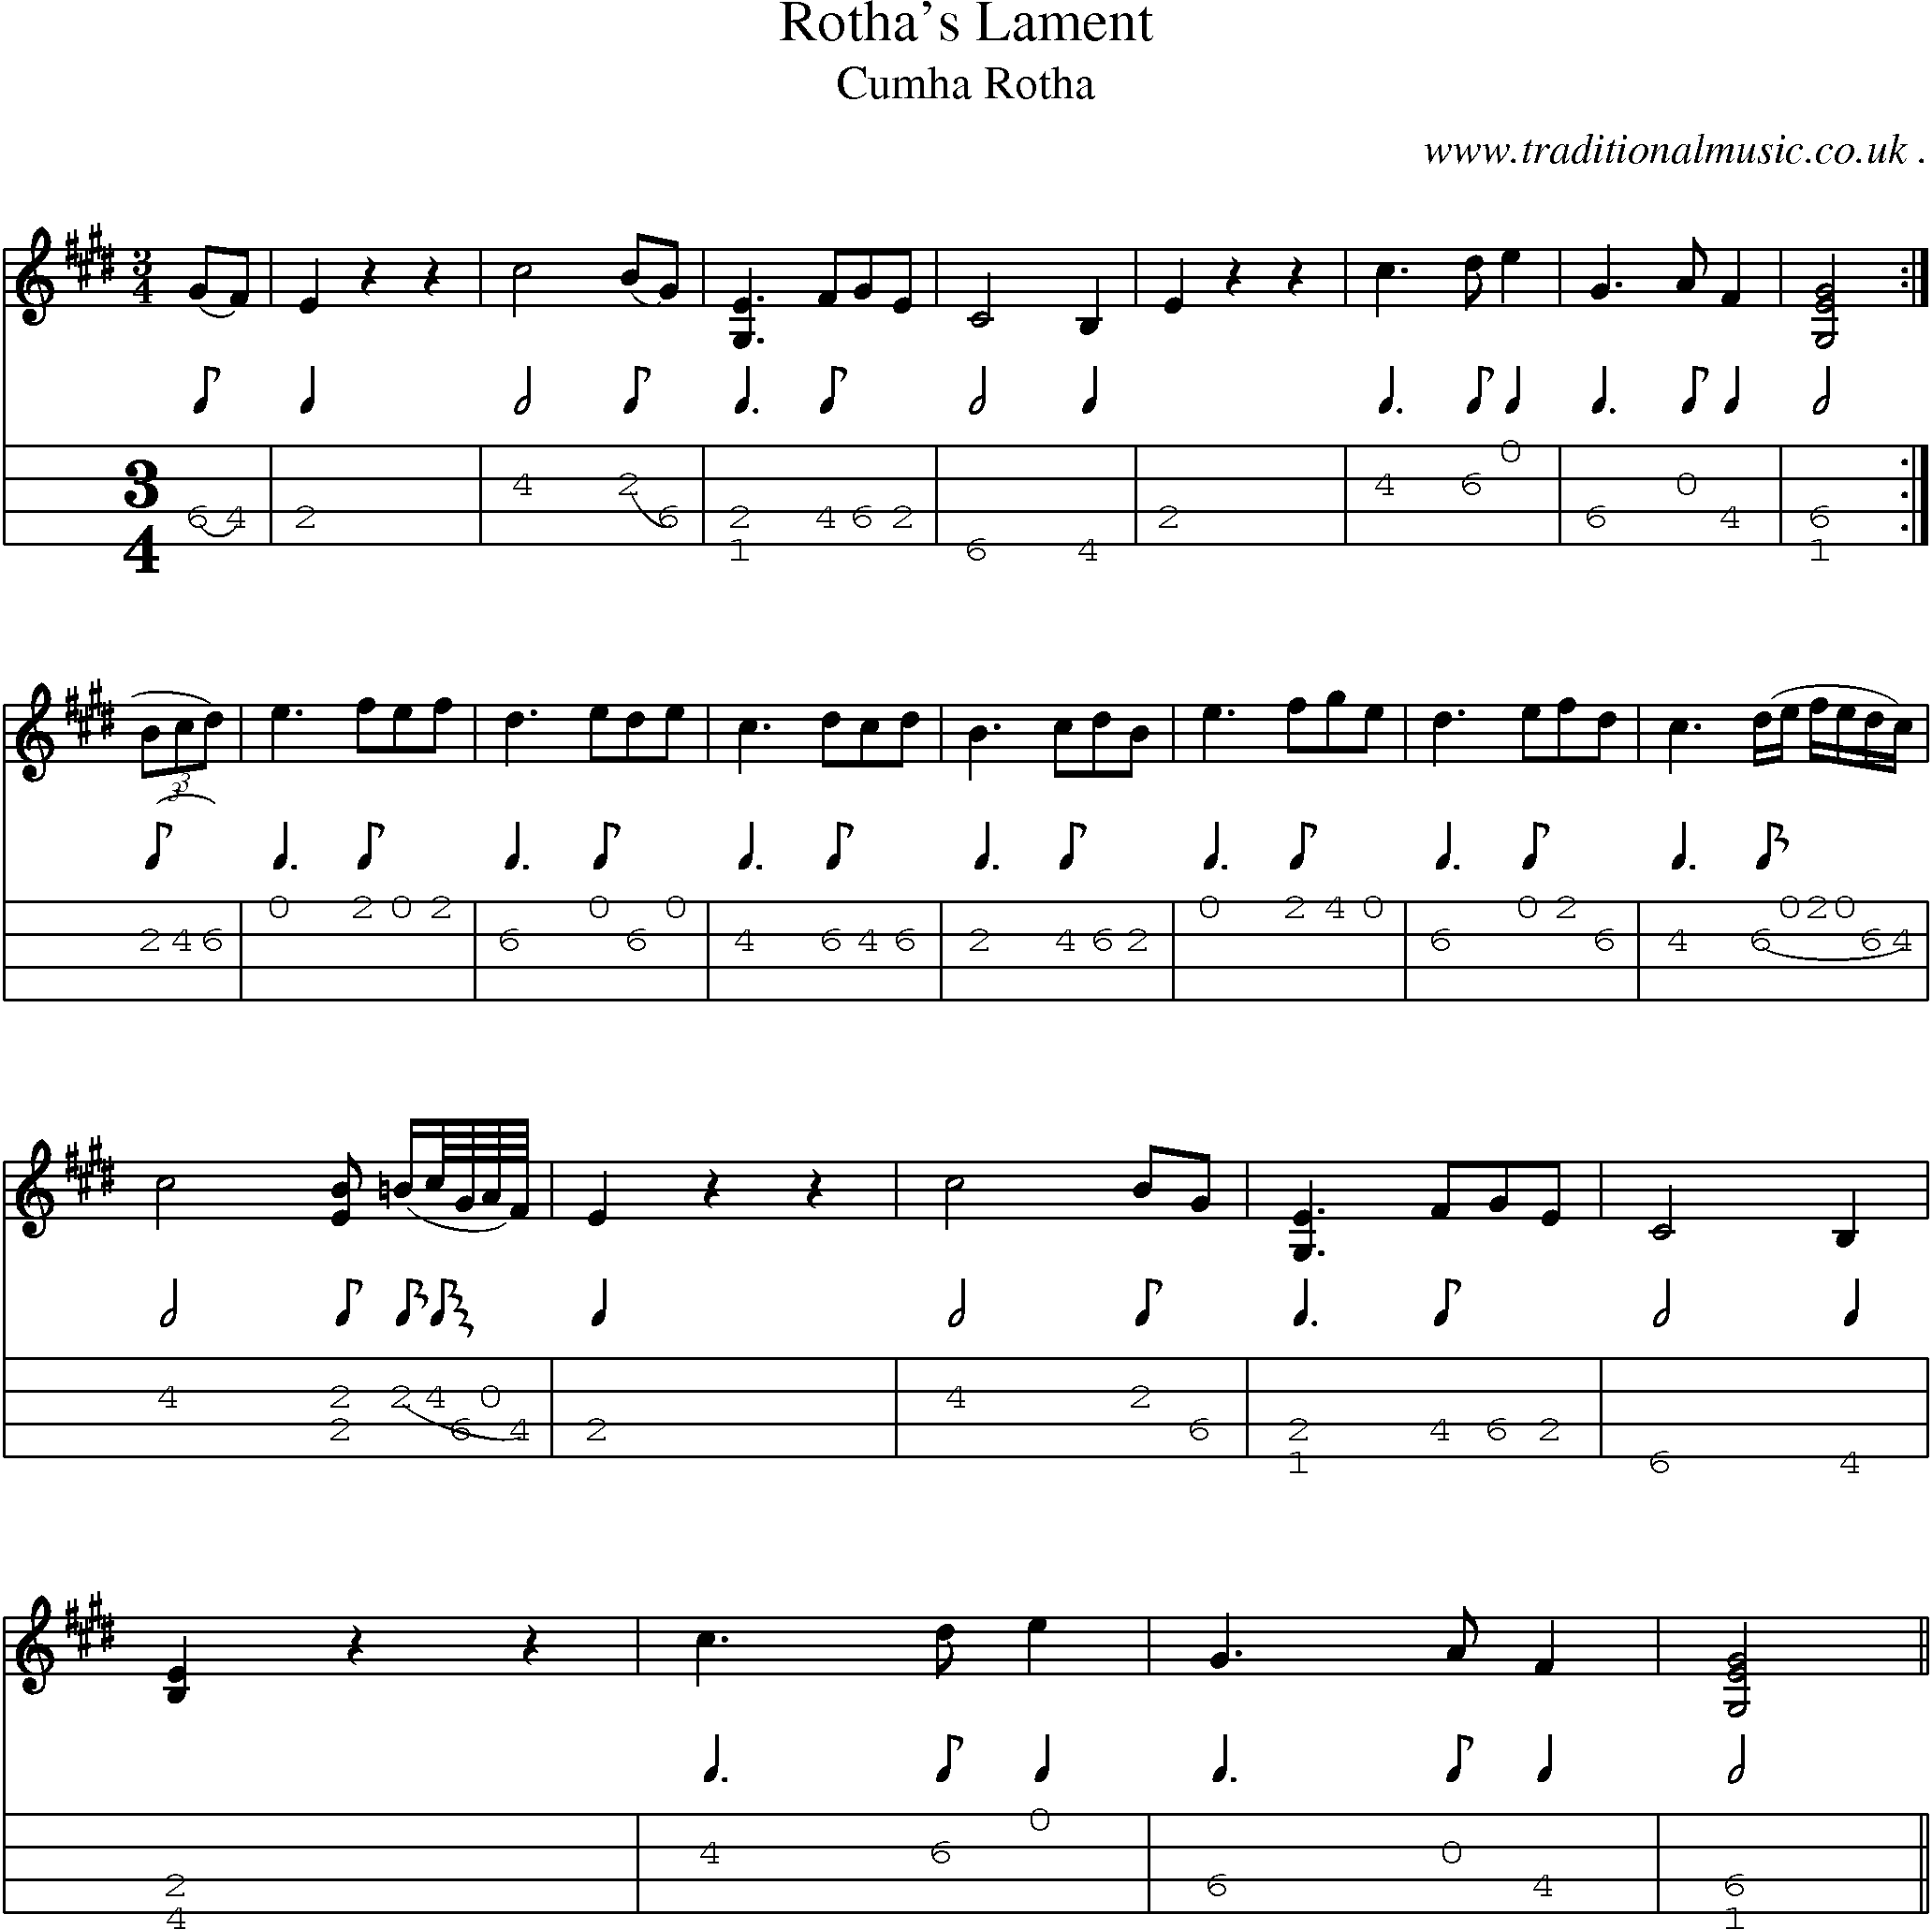 Sheet-music  score, Chords and Mandolin Tabs for Rothas Lament